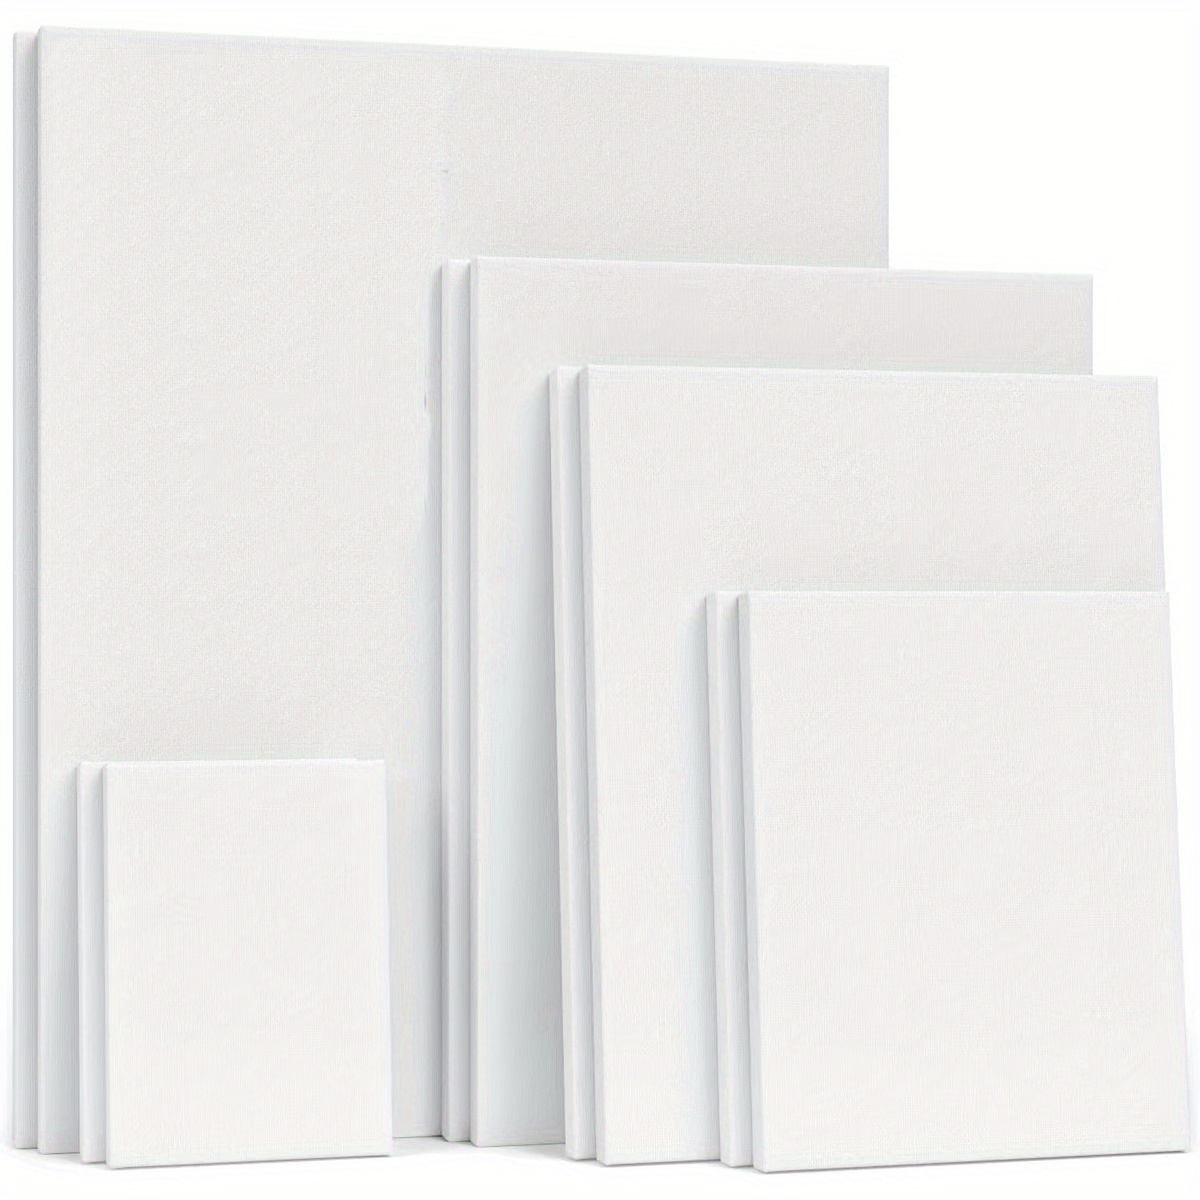 4pcs Stretched Canvas, A Set Of 4 Size, 100% Cotton Canvases For Painting,  8 Oz Gesso-Primed, Art Supplies For Acrylic And Oil Painting.